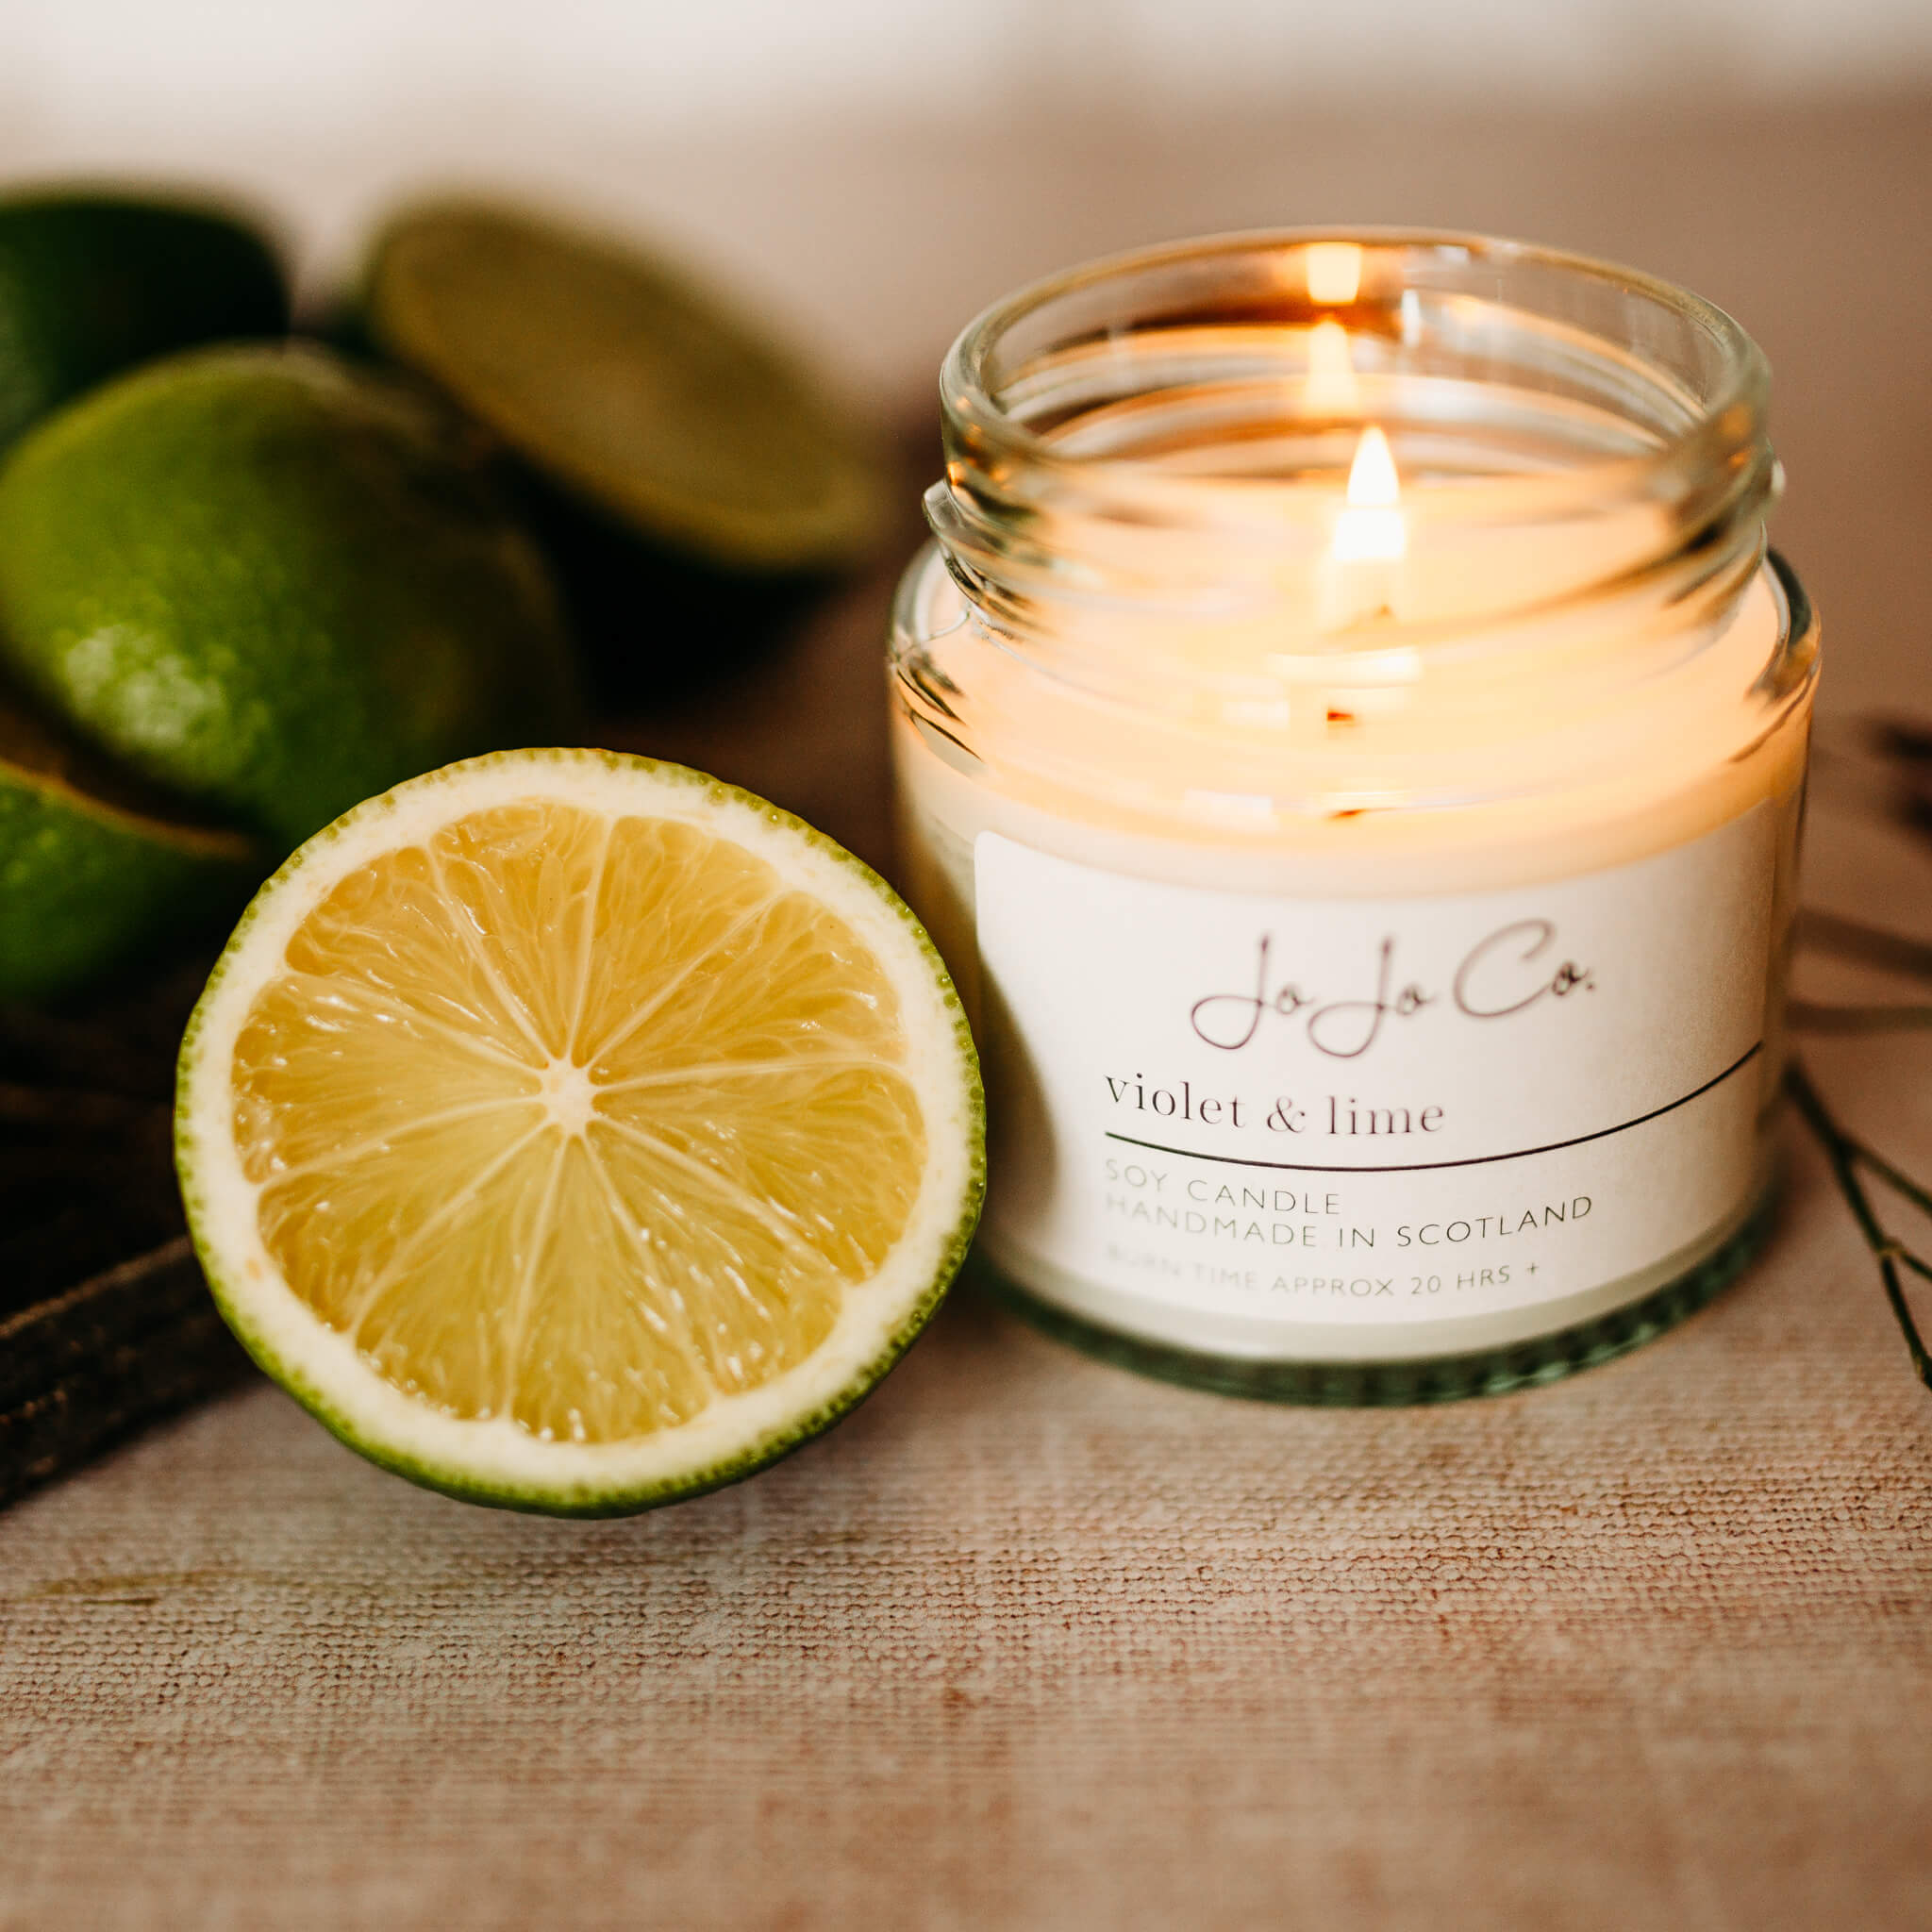 A small JoJo Co. Violet & Lime candle sits beside wedges of lime. The candle is lit, casting a warm glow from the flame.